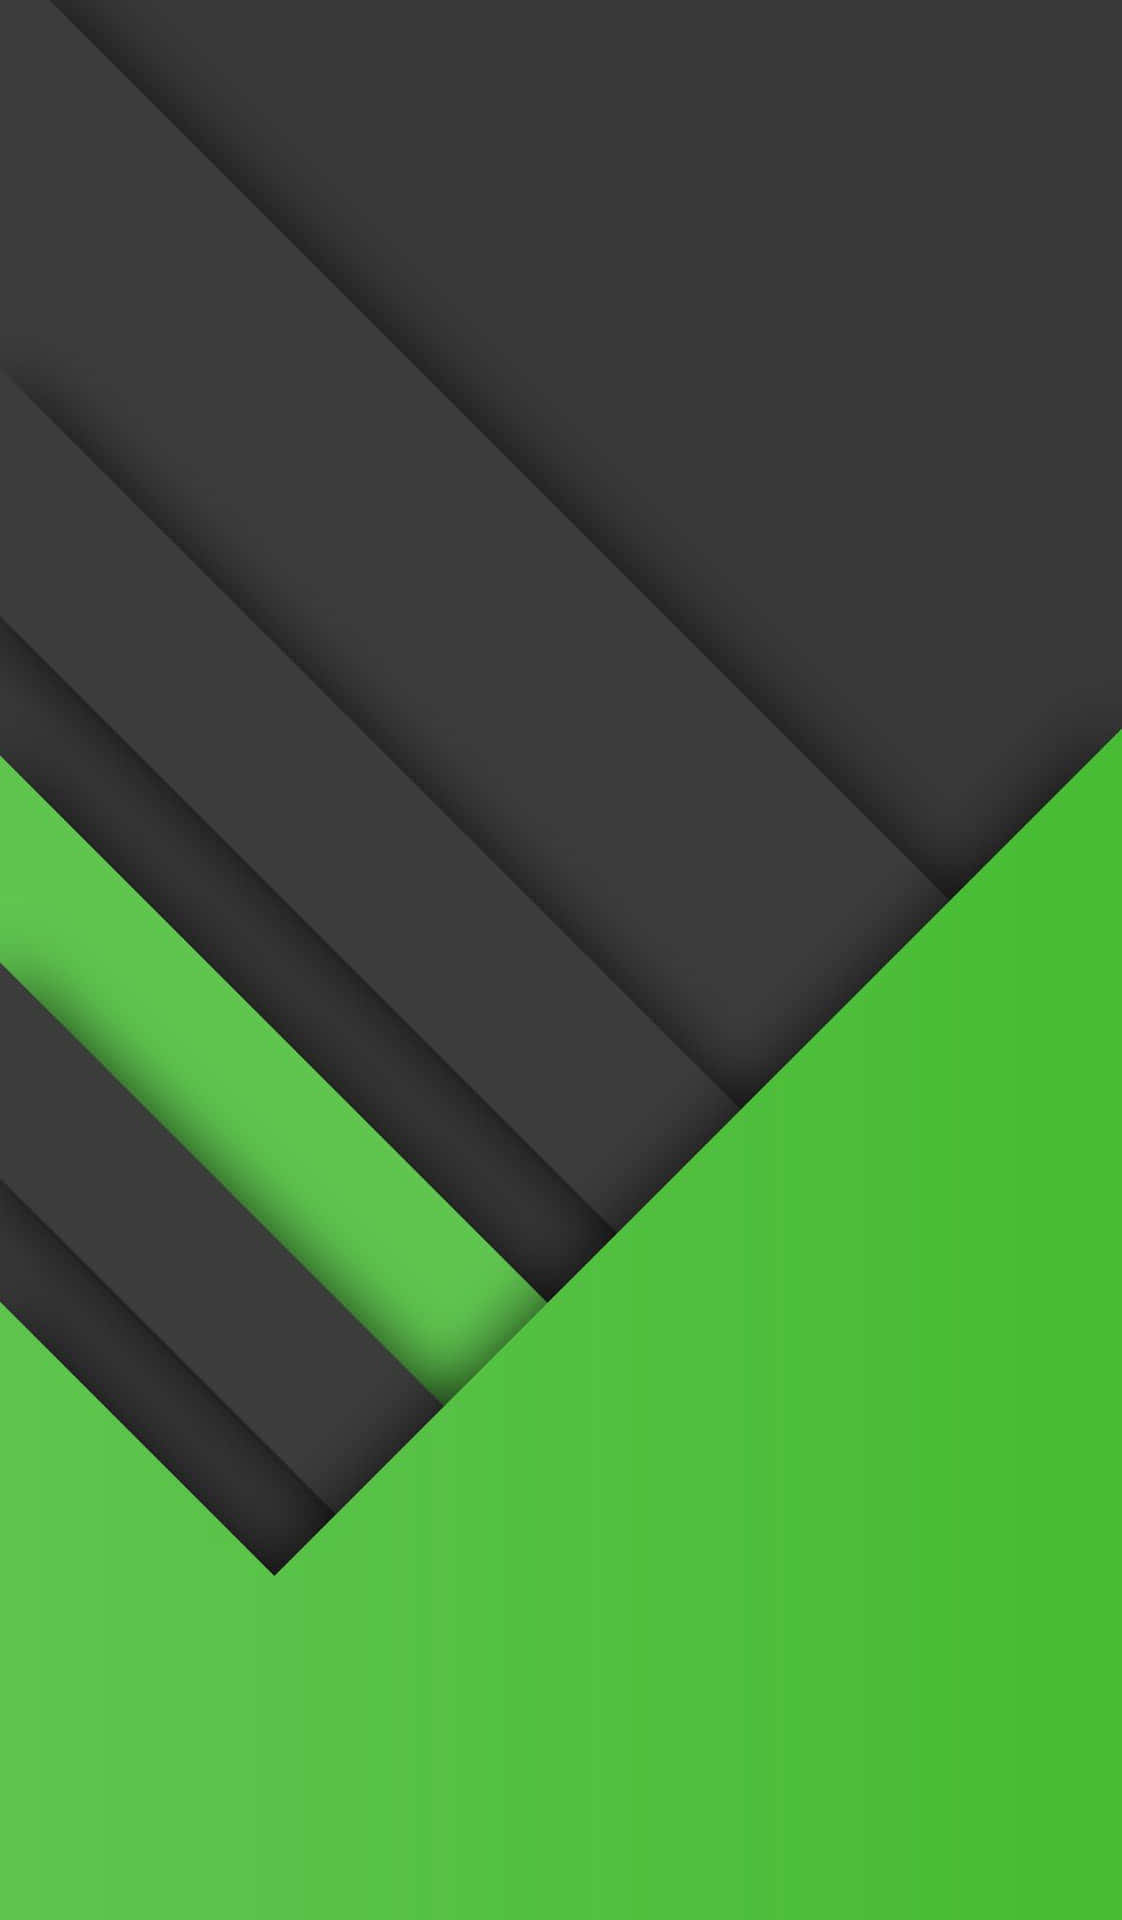 Iphone X Material Background Black Green Shapes